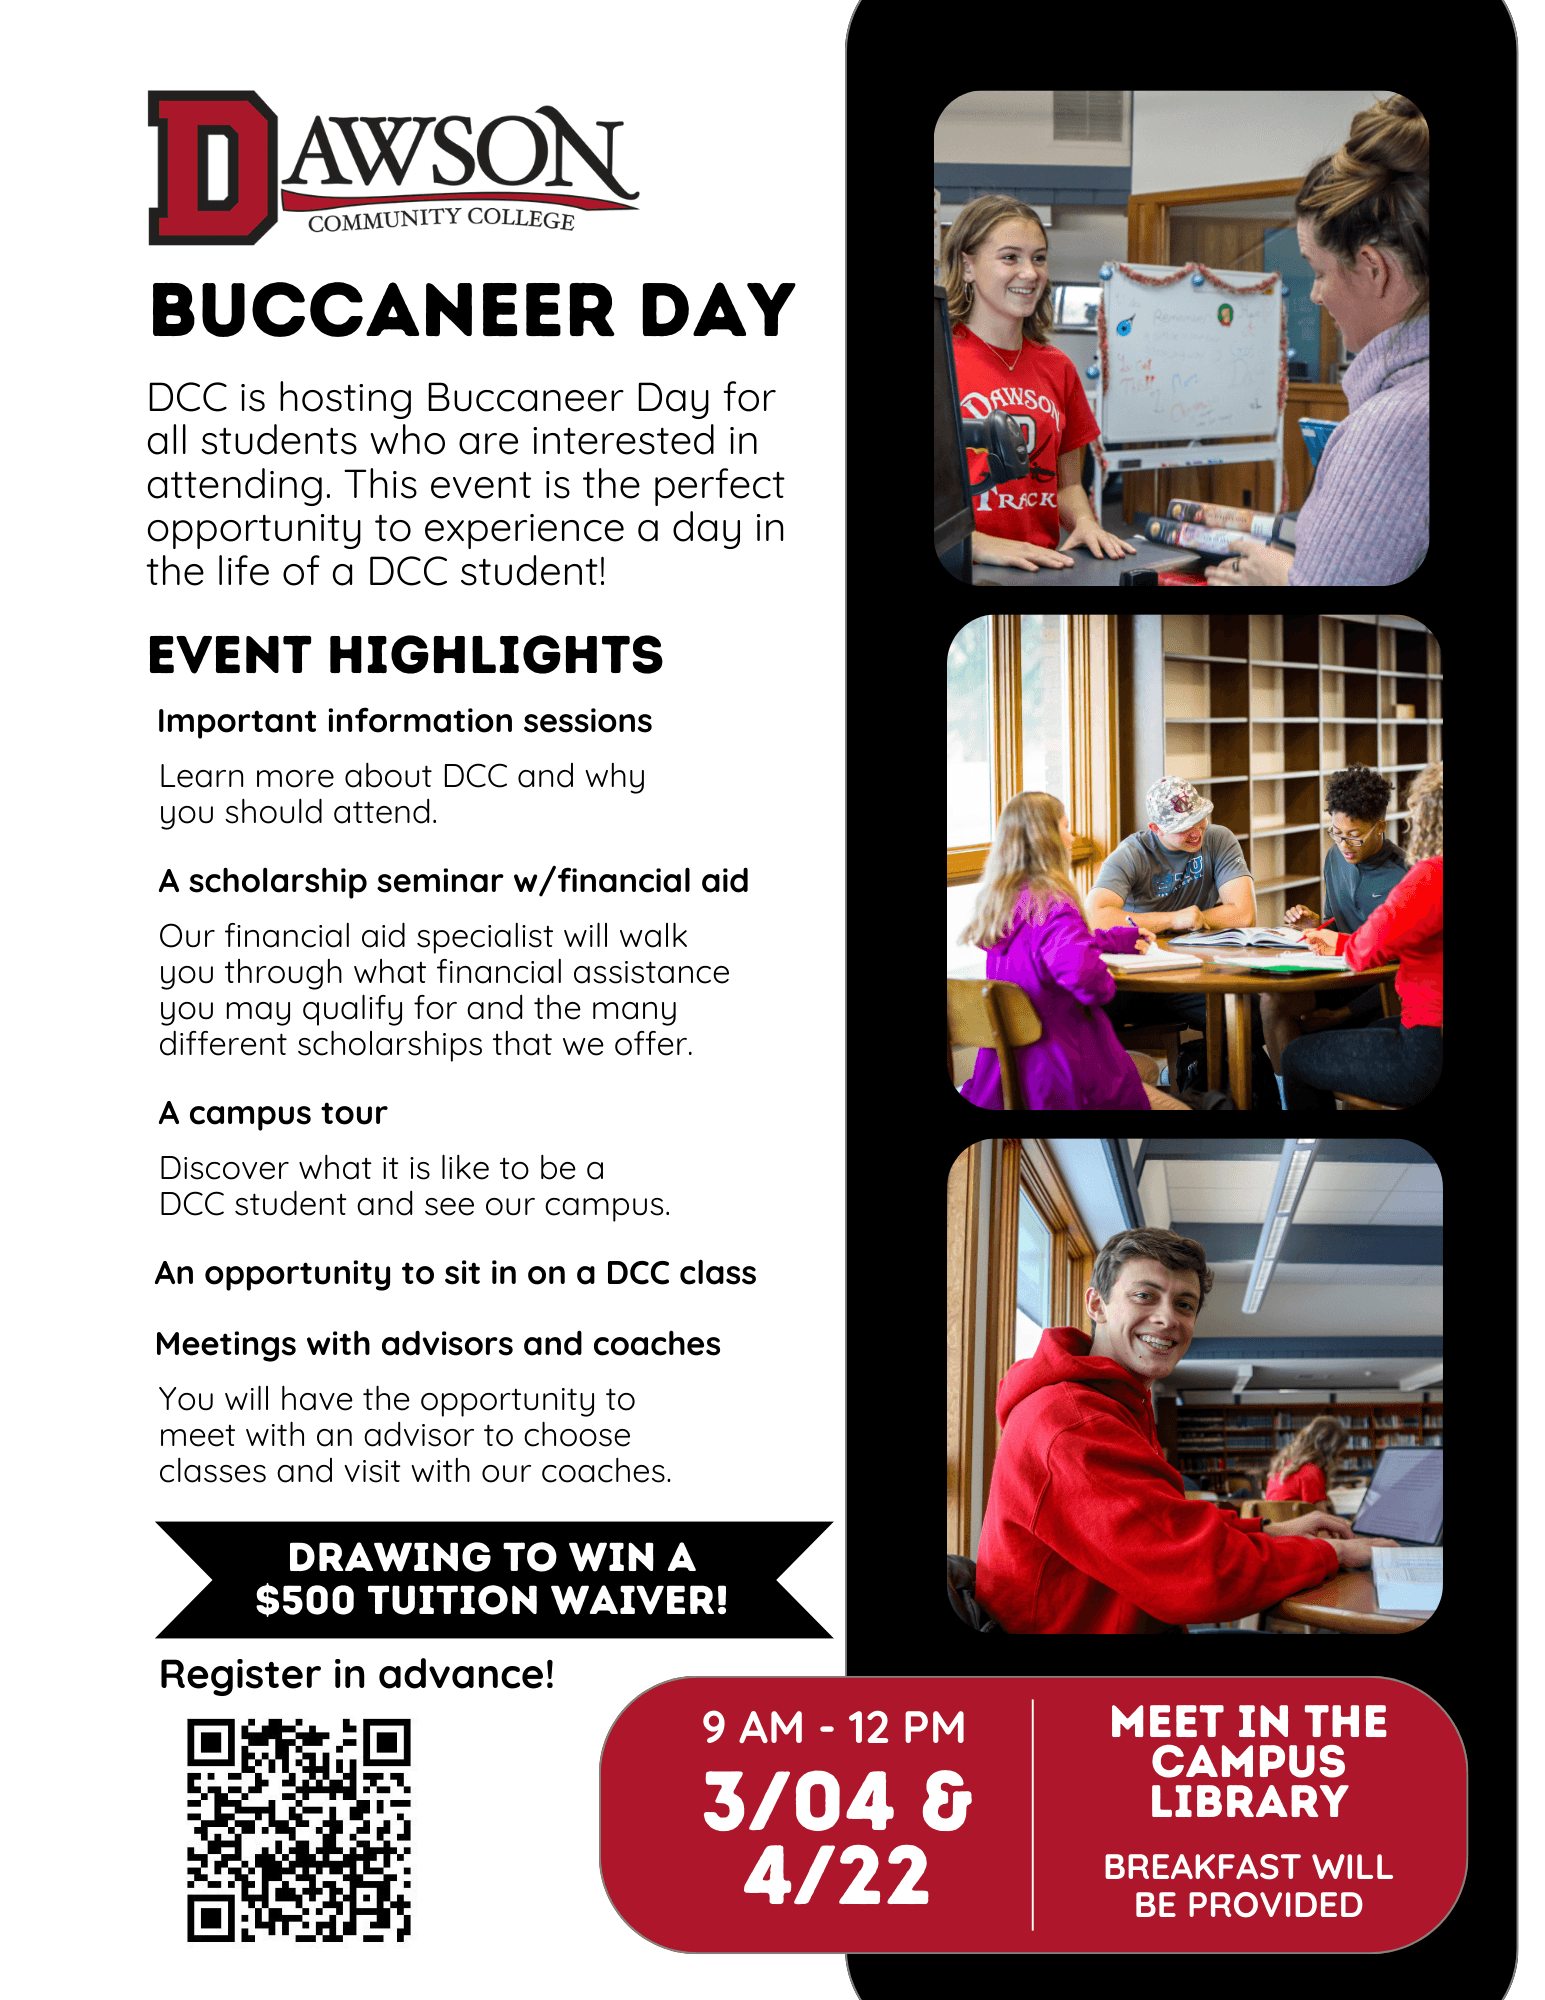 March 4th and April 22nd Spring Buccaneer Days!